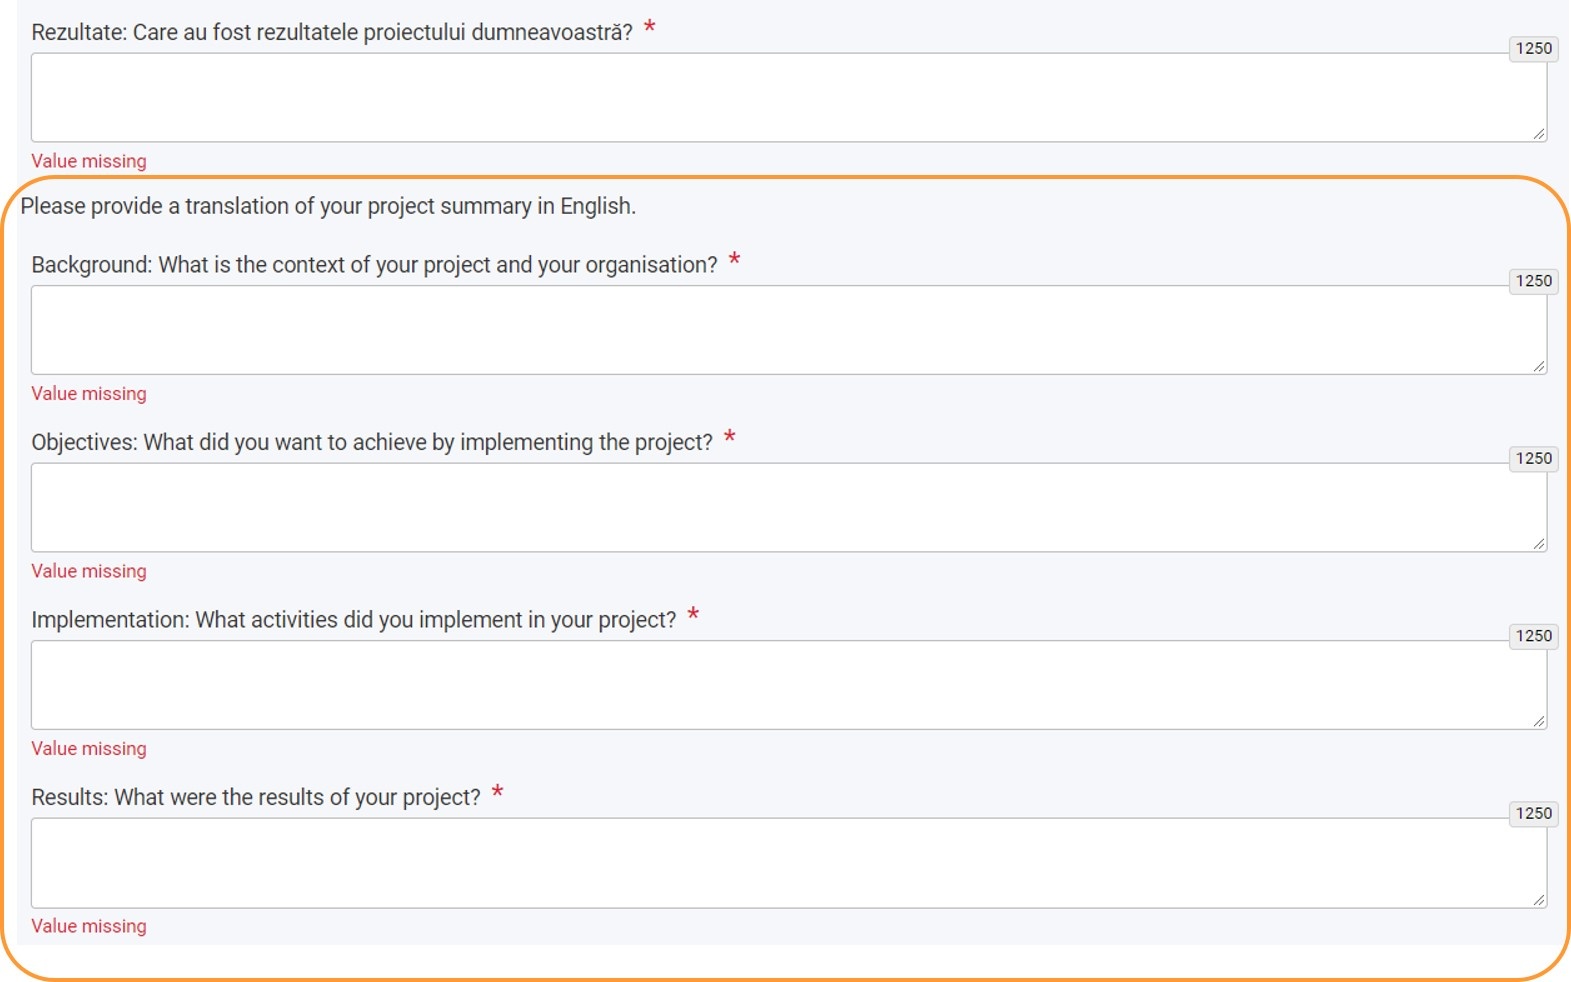 Provide a translation of the Project Summary in English